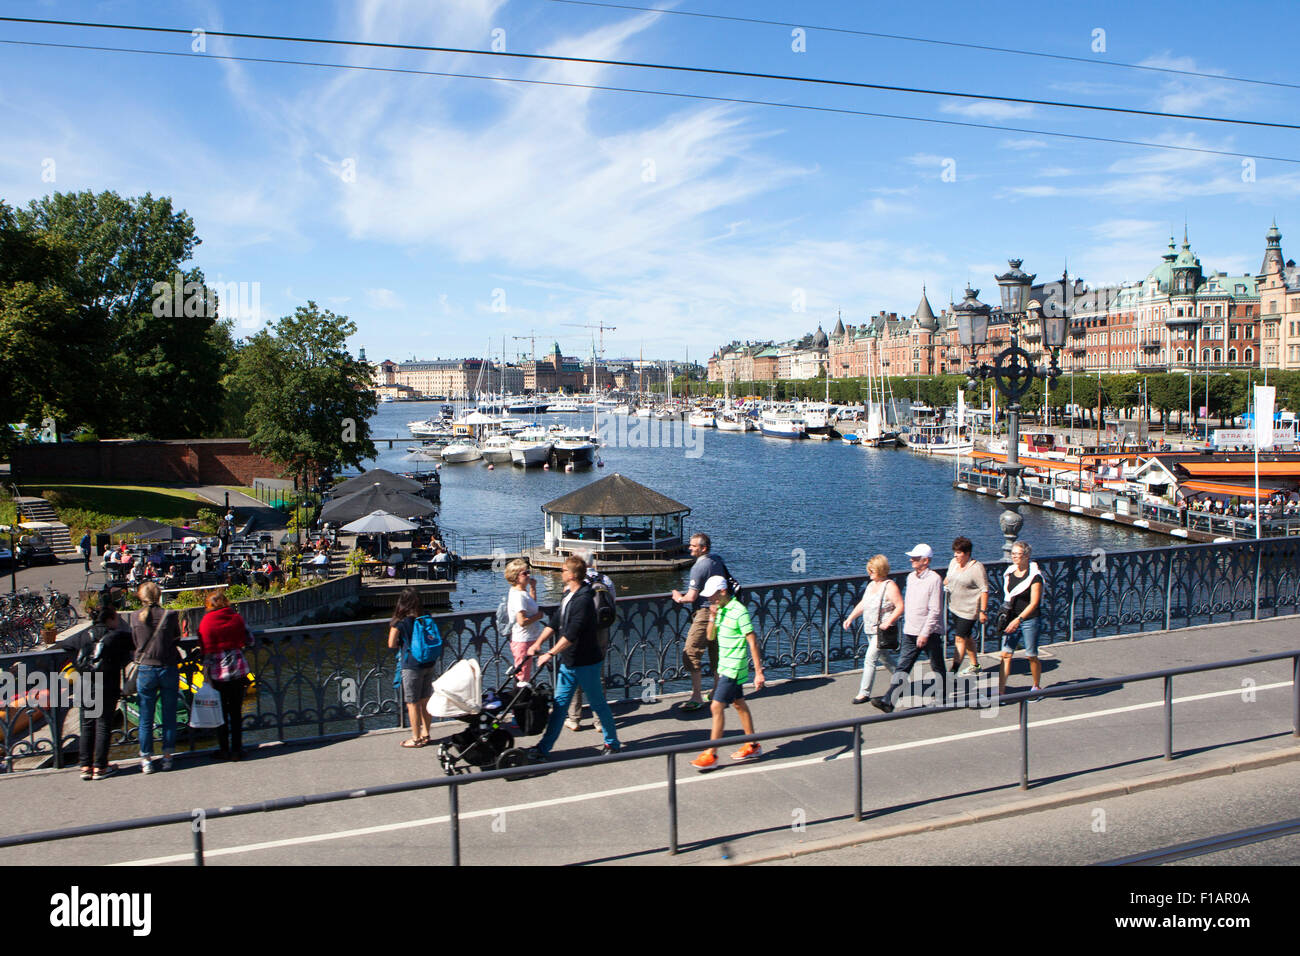 Stockholm the capital city of Sweden and most populous city in the Nordic region Stock Photo